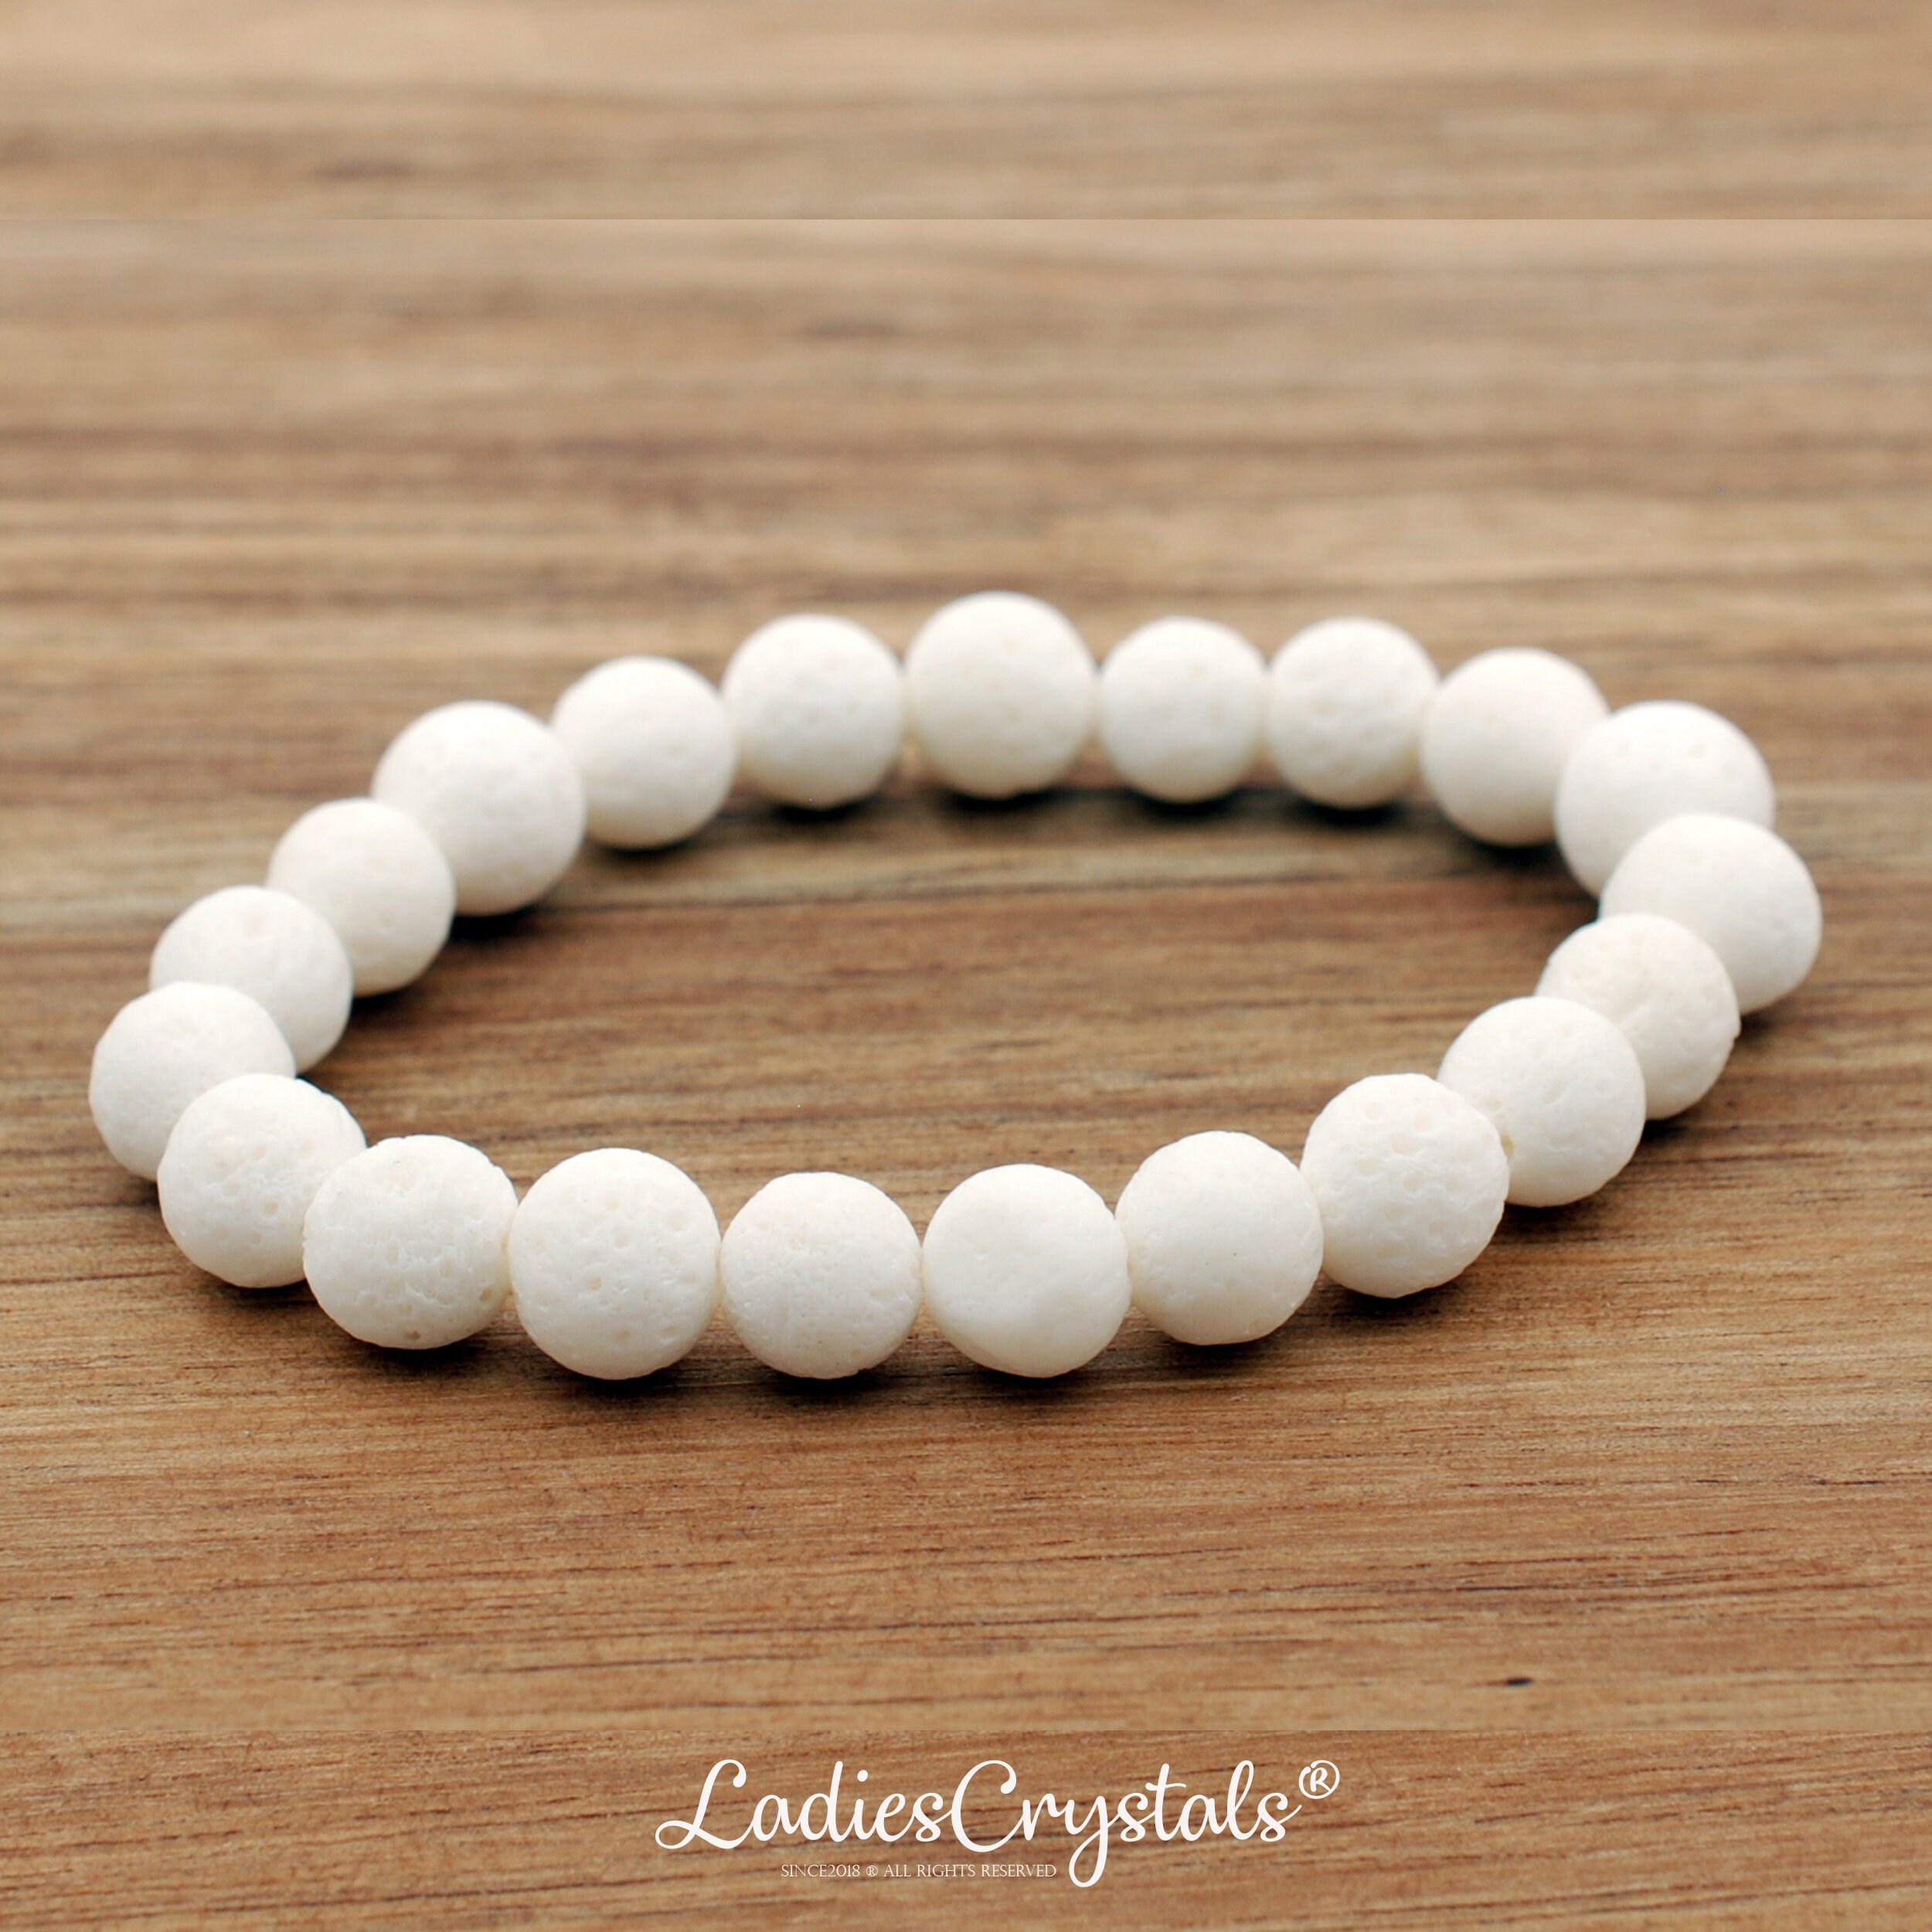 Pearl and Coral bead Bracelet To calms emotions and increases peace of mind  - Engineered to Heal²